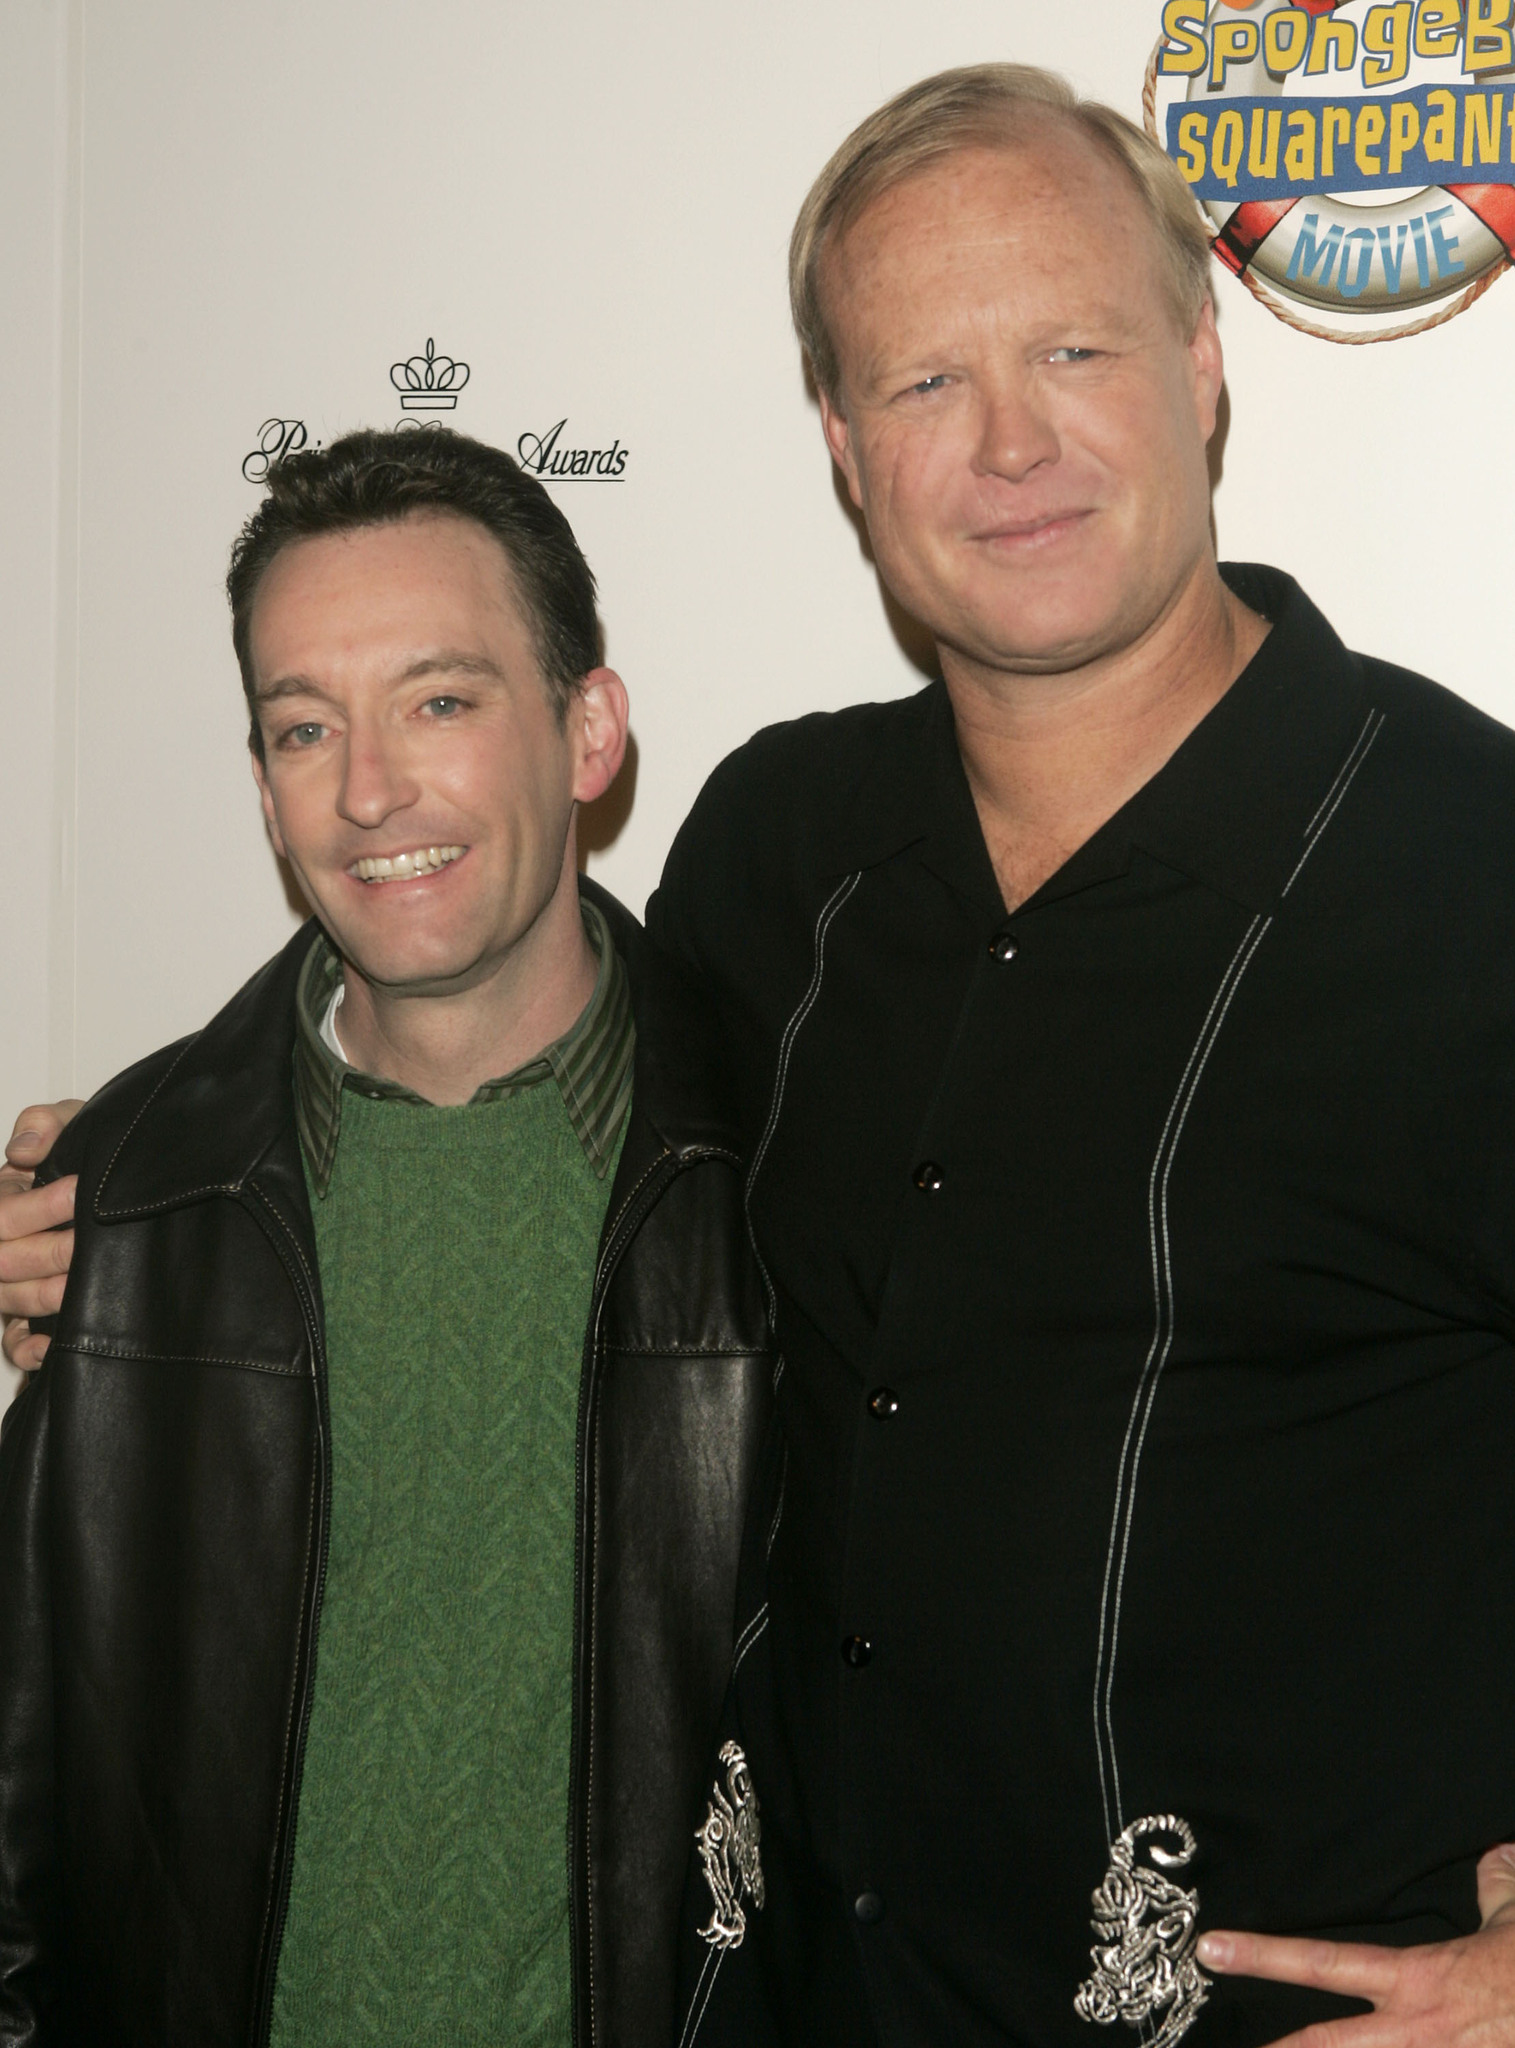 Bill Fagerbakke and Tom Kenny